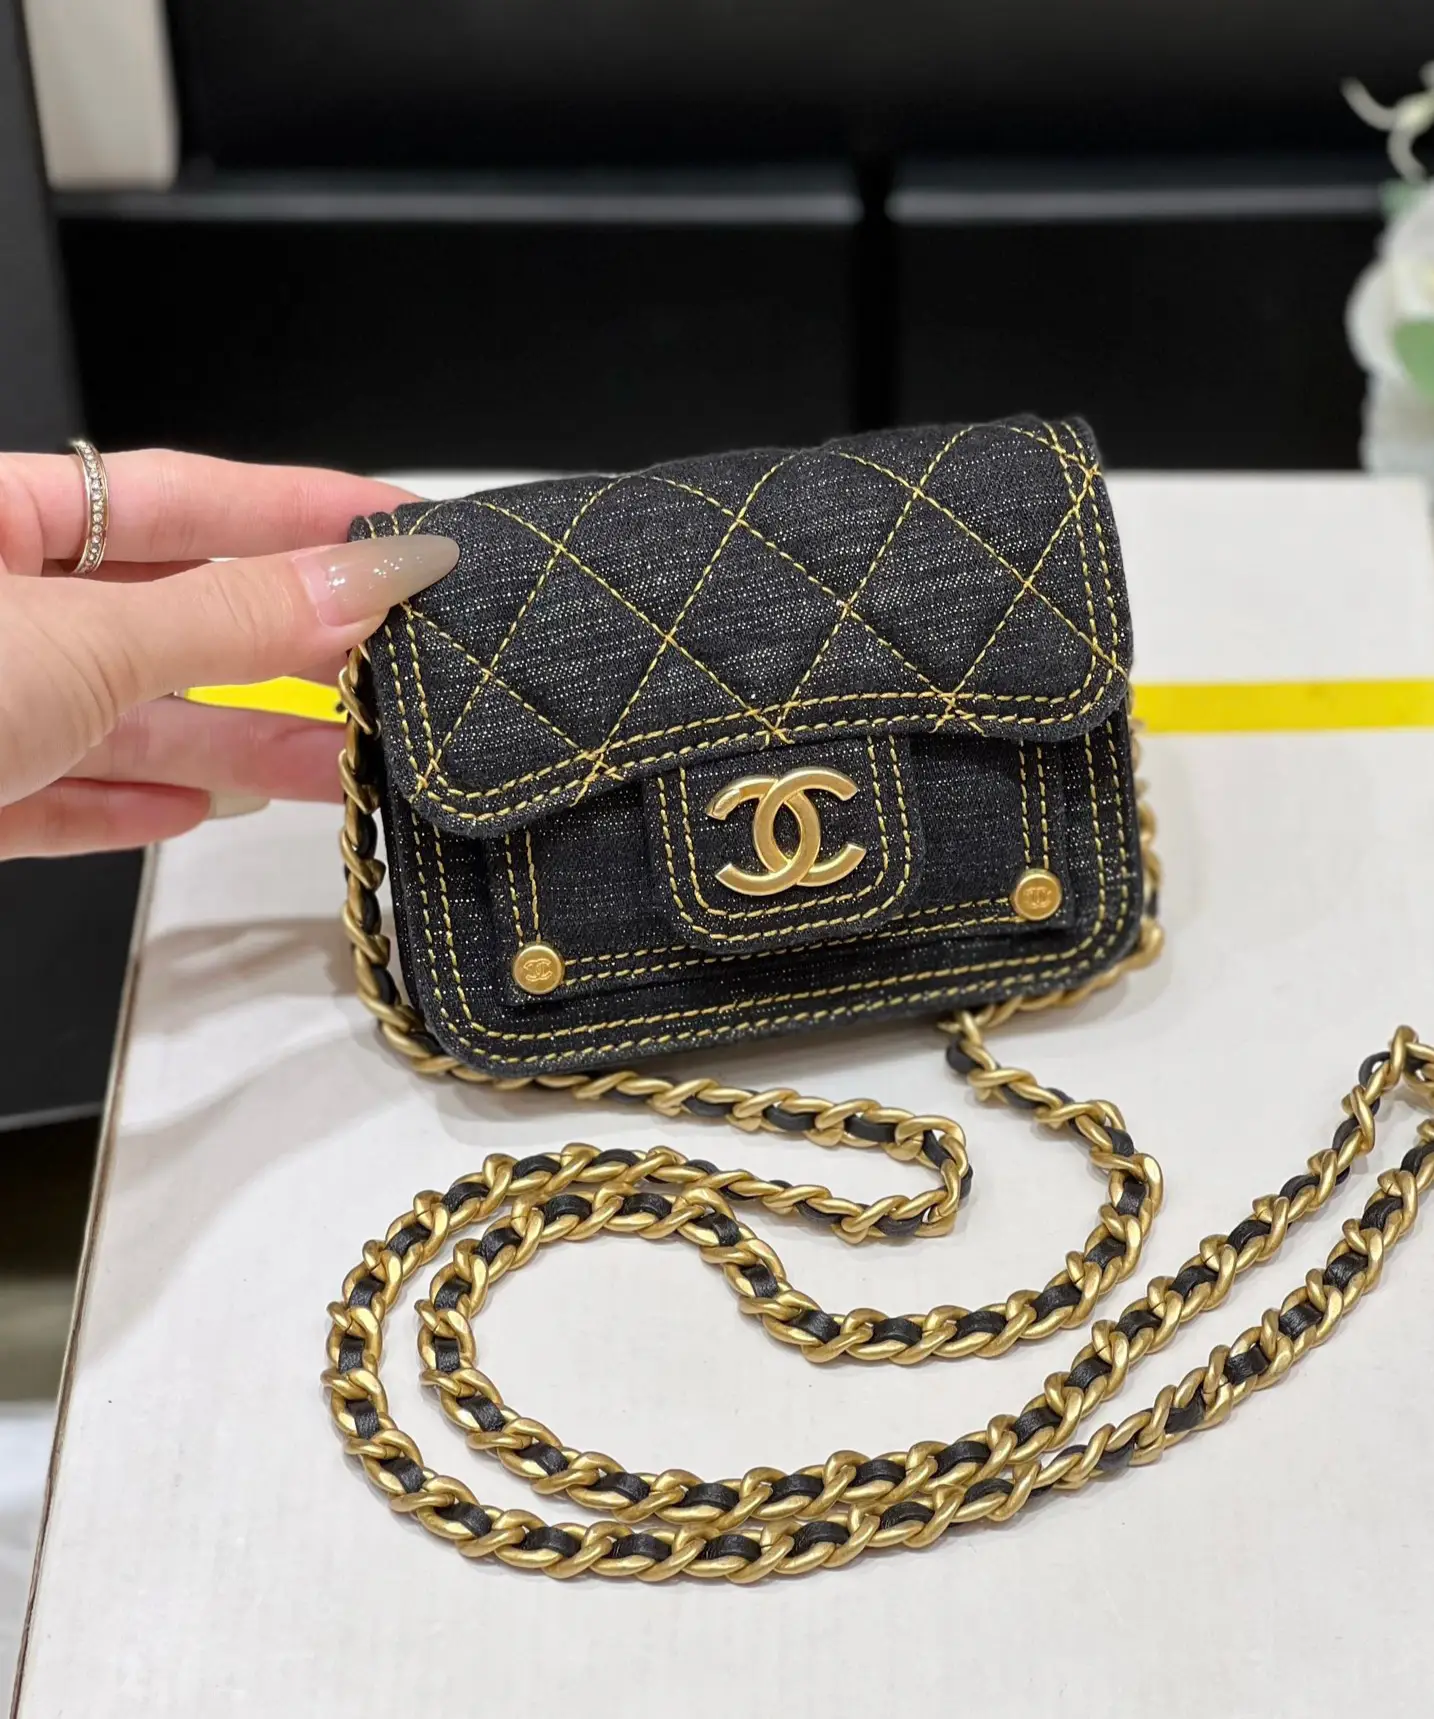 Chanel mini bag 🌸, Gallery posted by Jay Chou